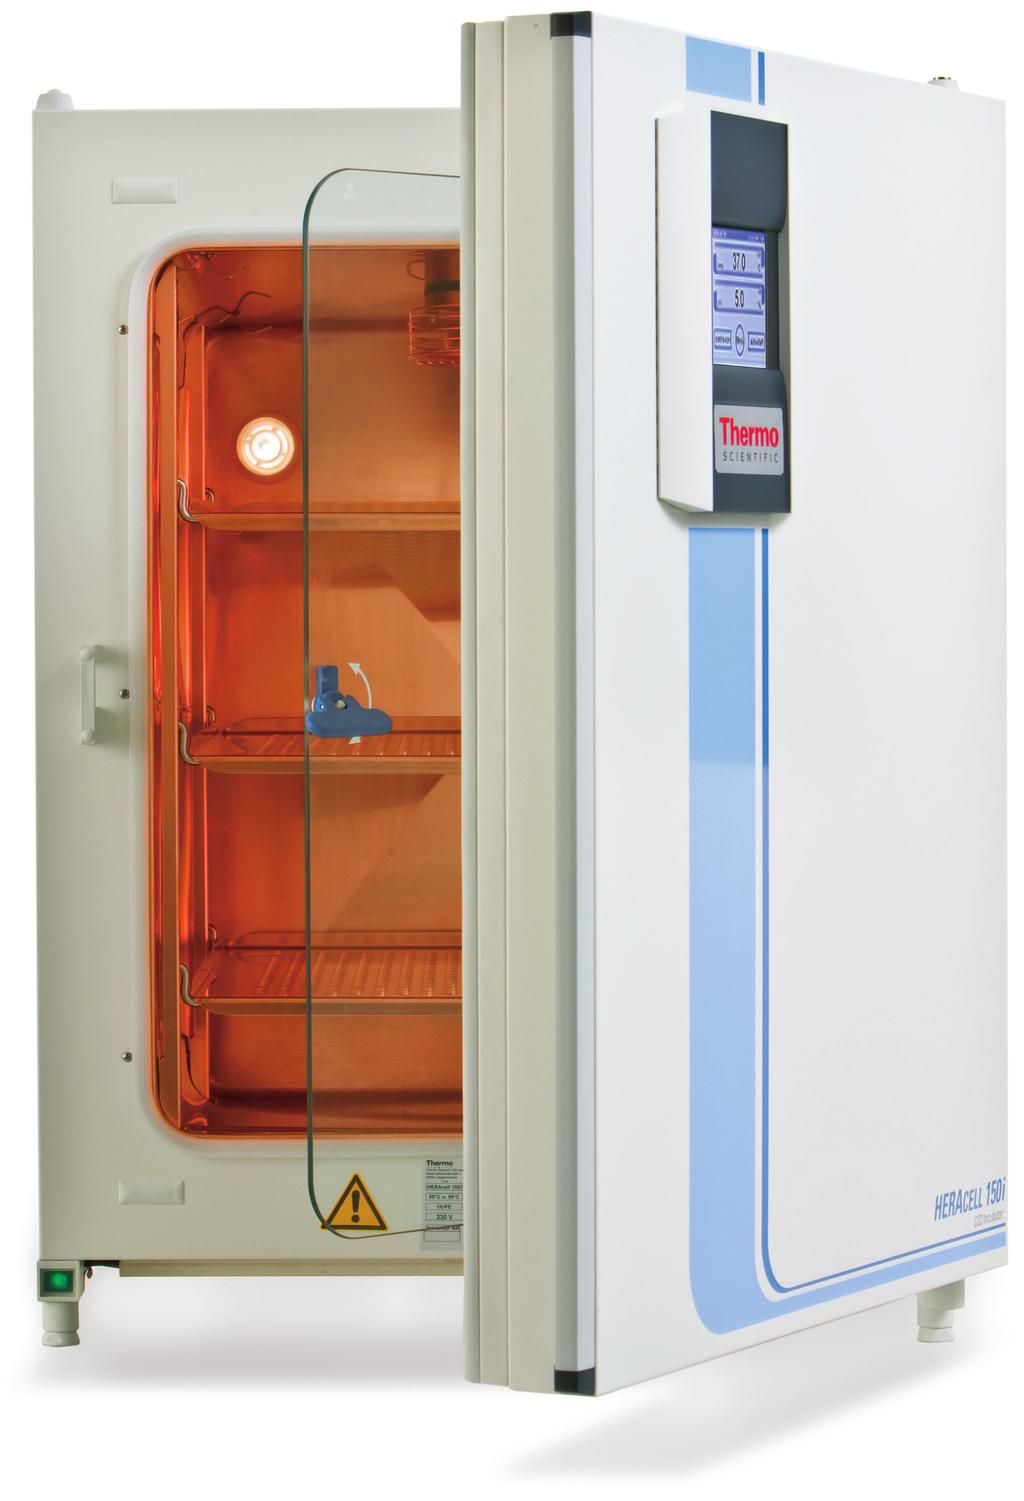 SECURED: Our ContraCon moist heat decontamination cycle is proven to